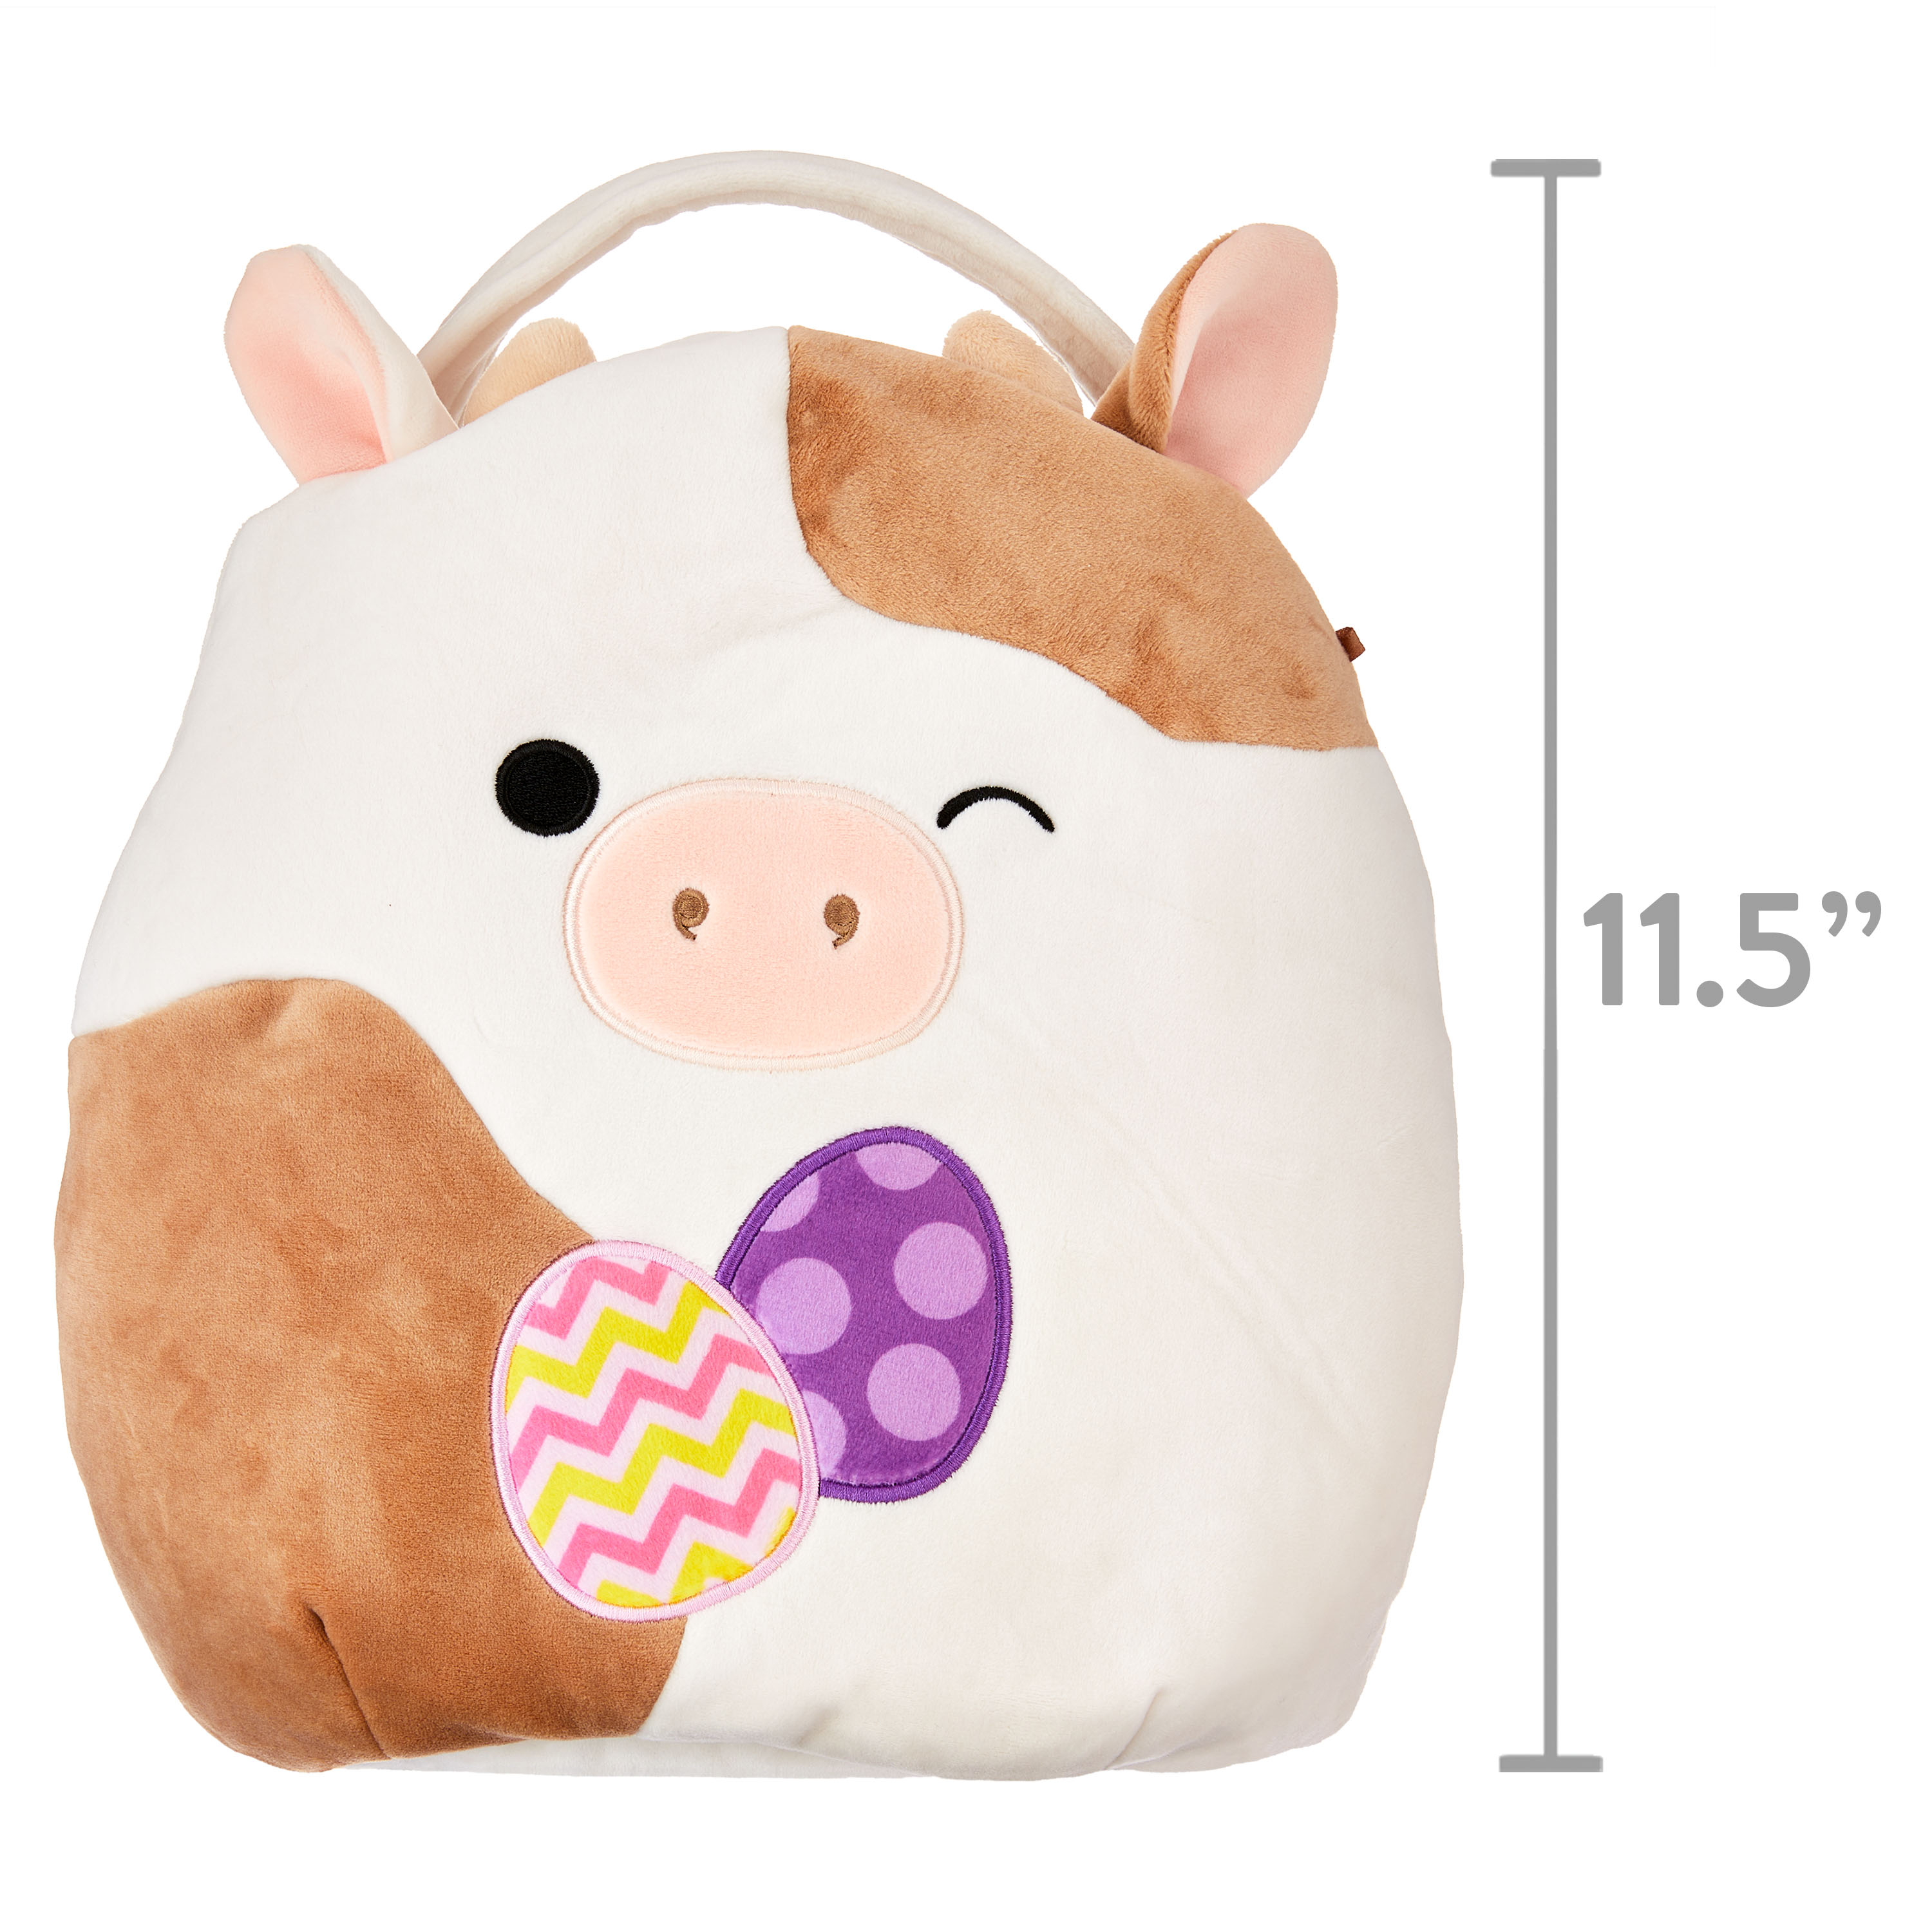 Squishmallows 12" Cow Treat Pail - Ronnie, The Stuffed Animal Plush - image 5 of 5